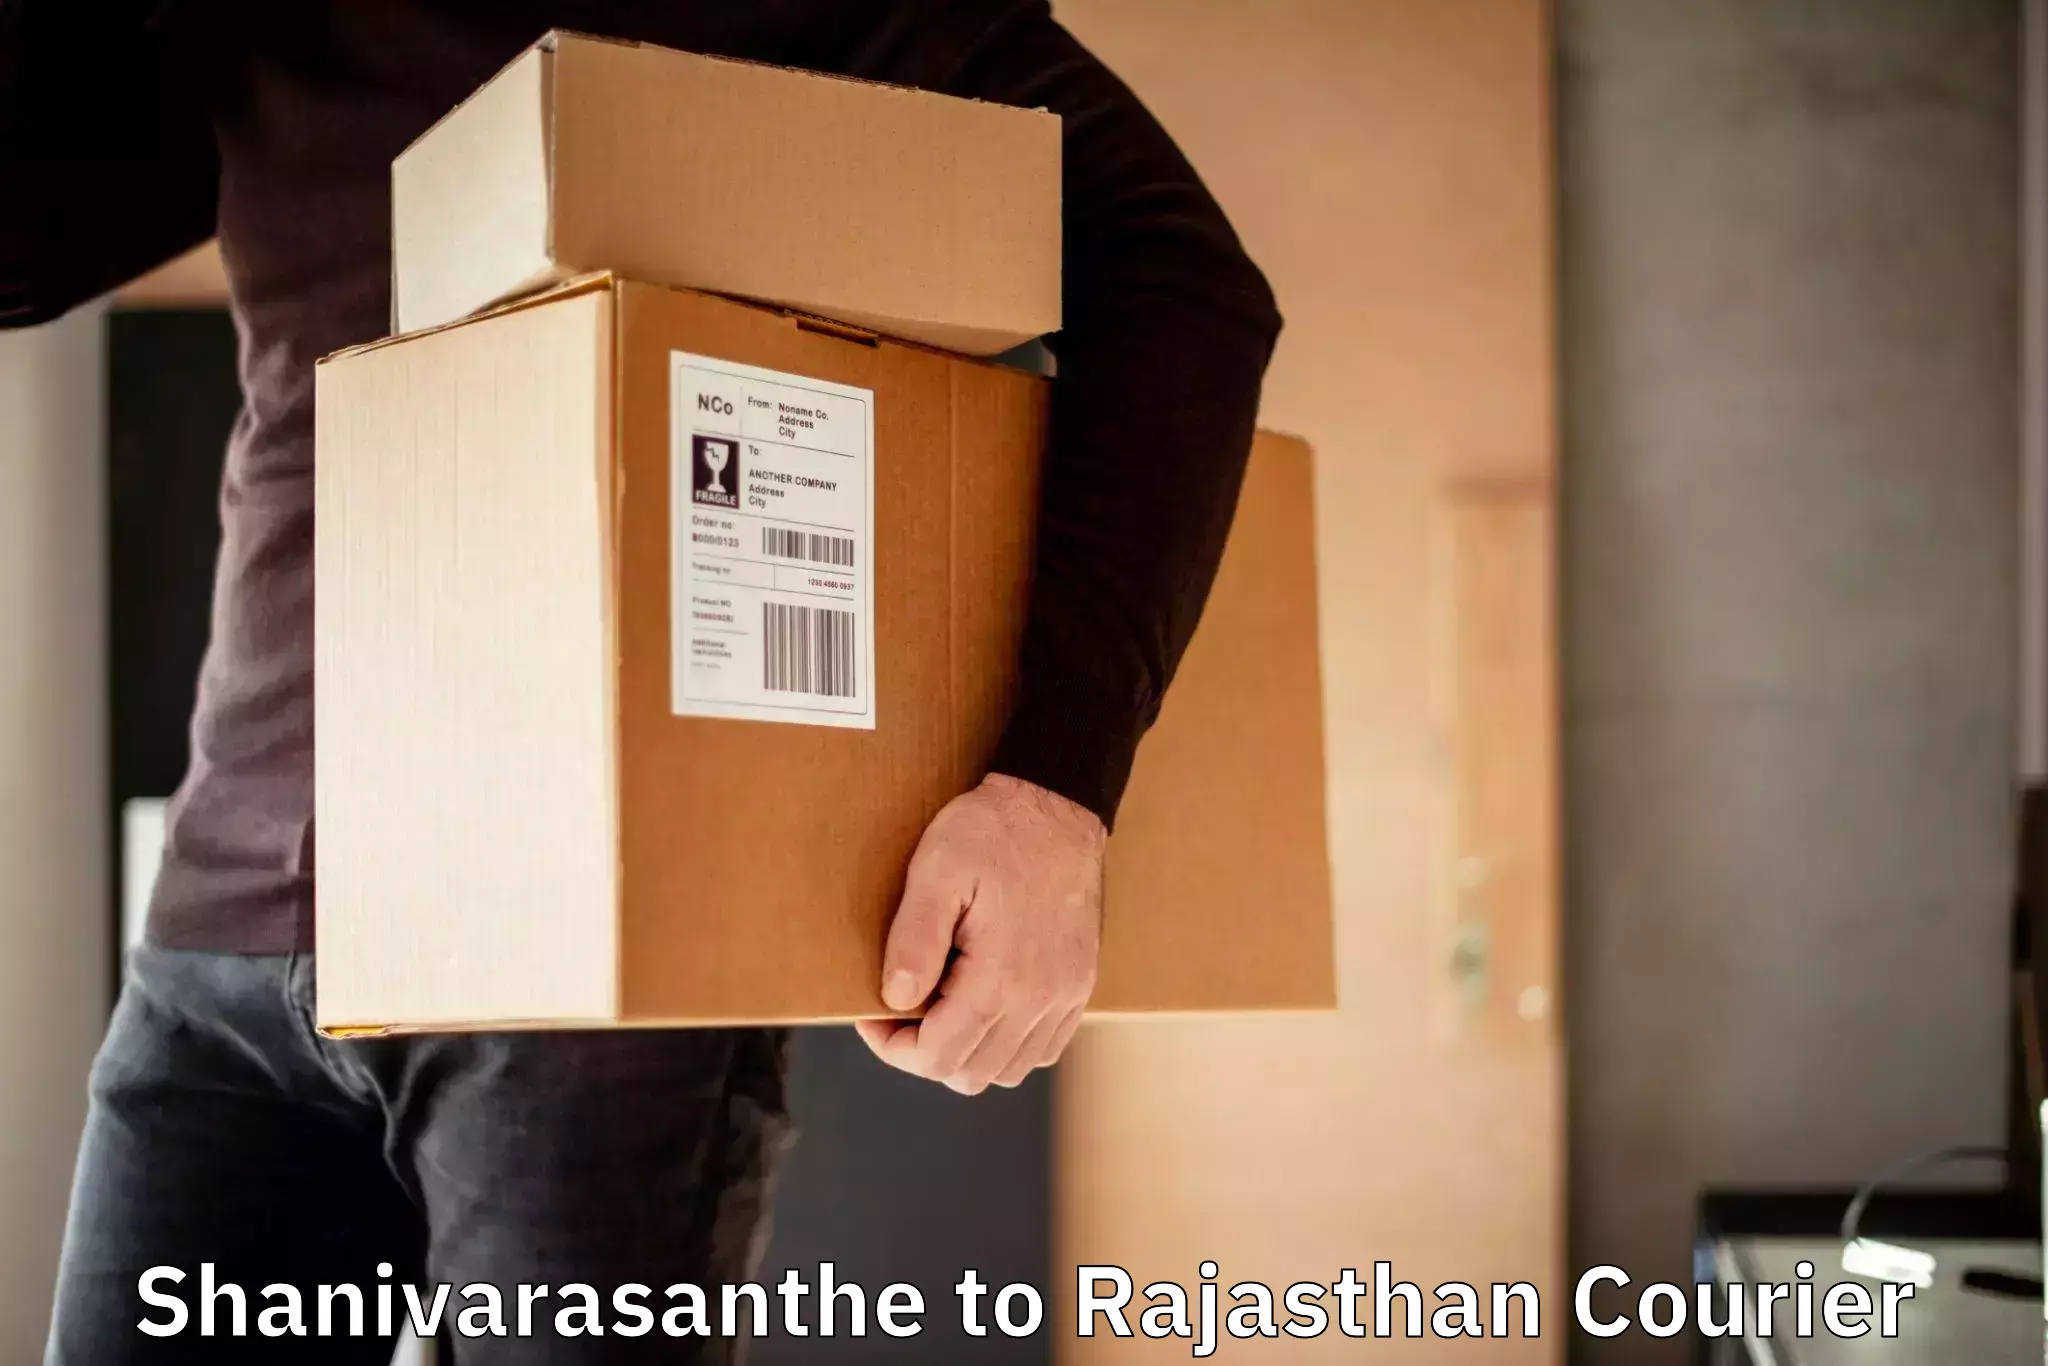 Automated shipping processes Shanivarasanthe to Rajasthan